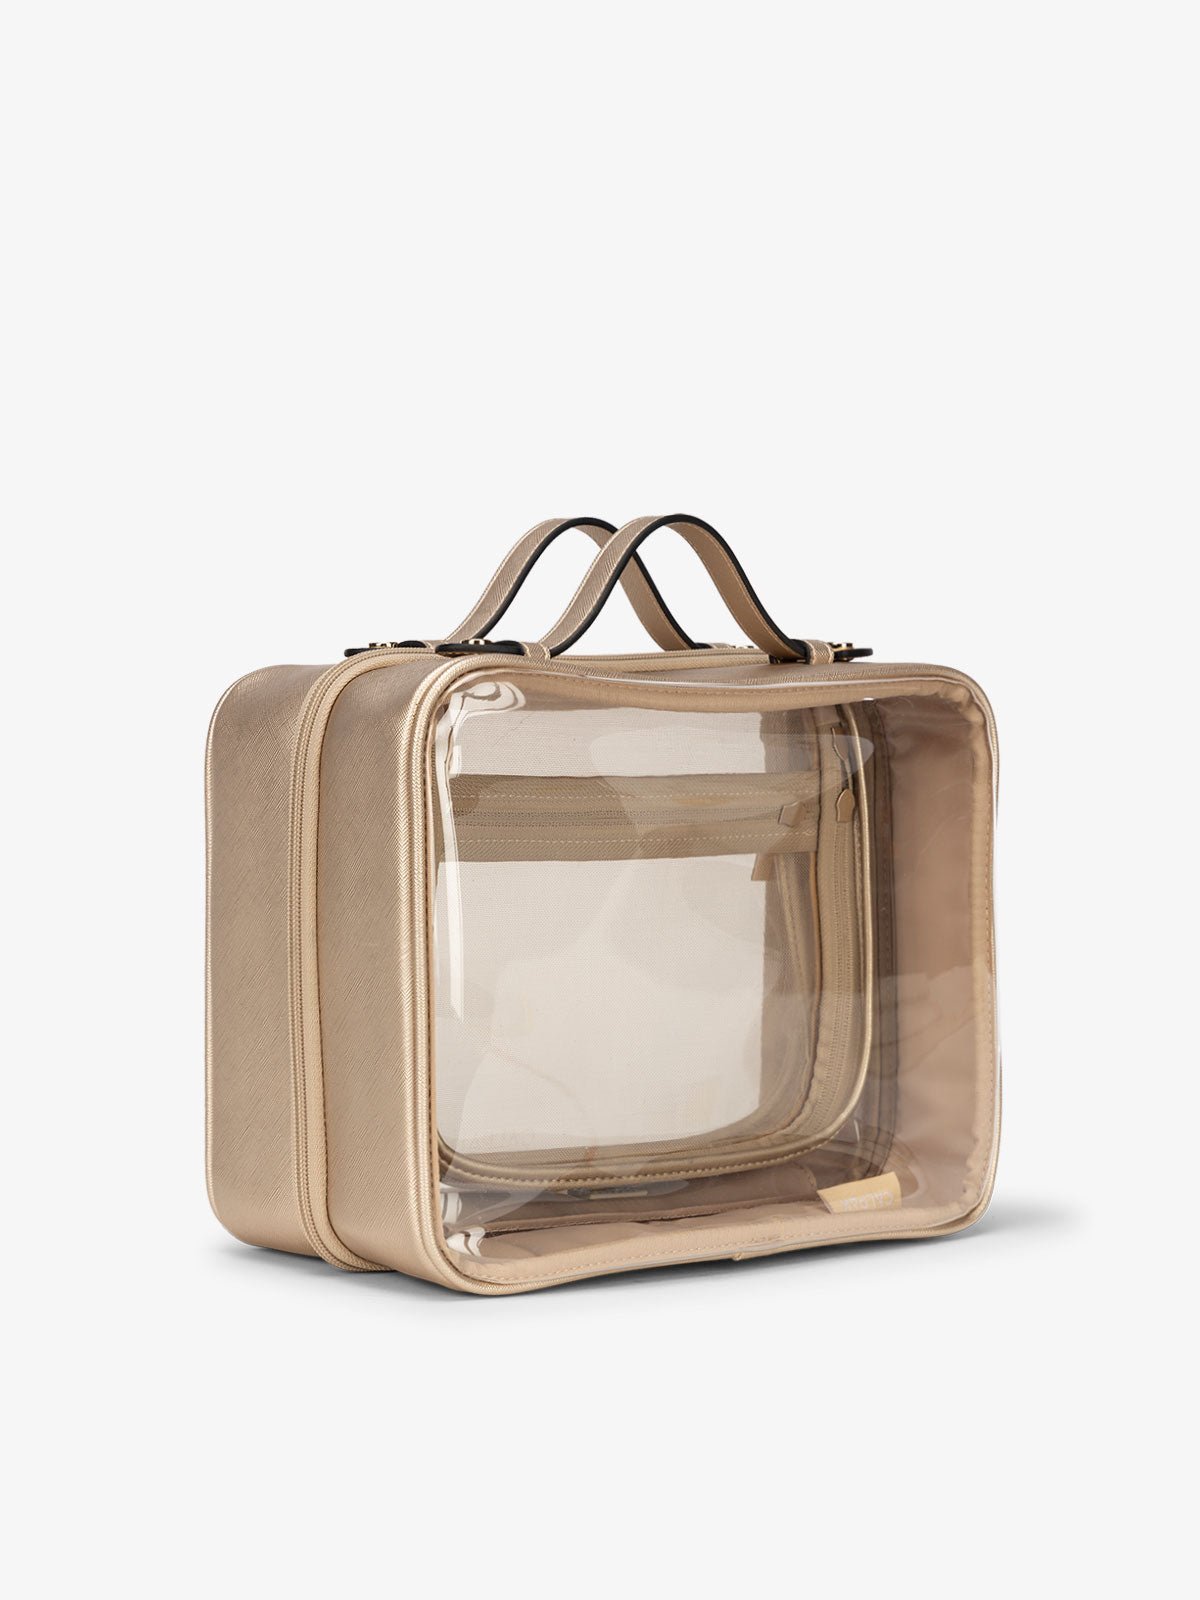 CALPAK large clear skincare bag with multiple zippered compartments in metallic gold